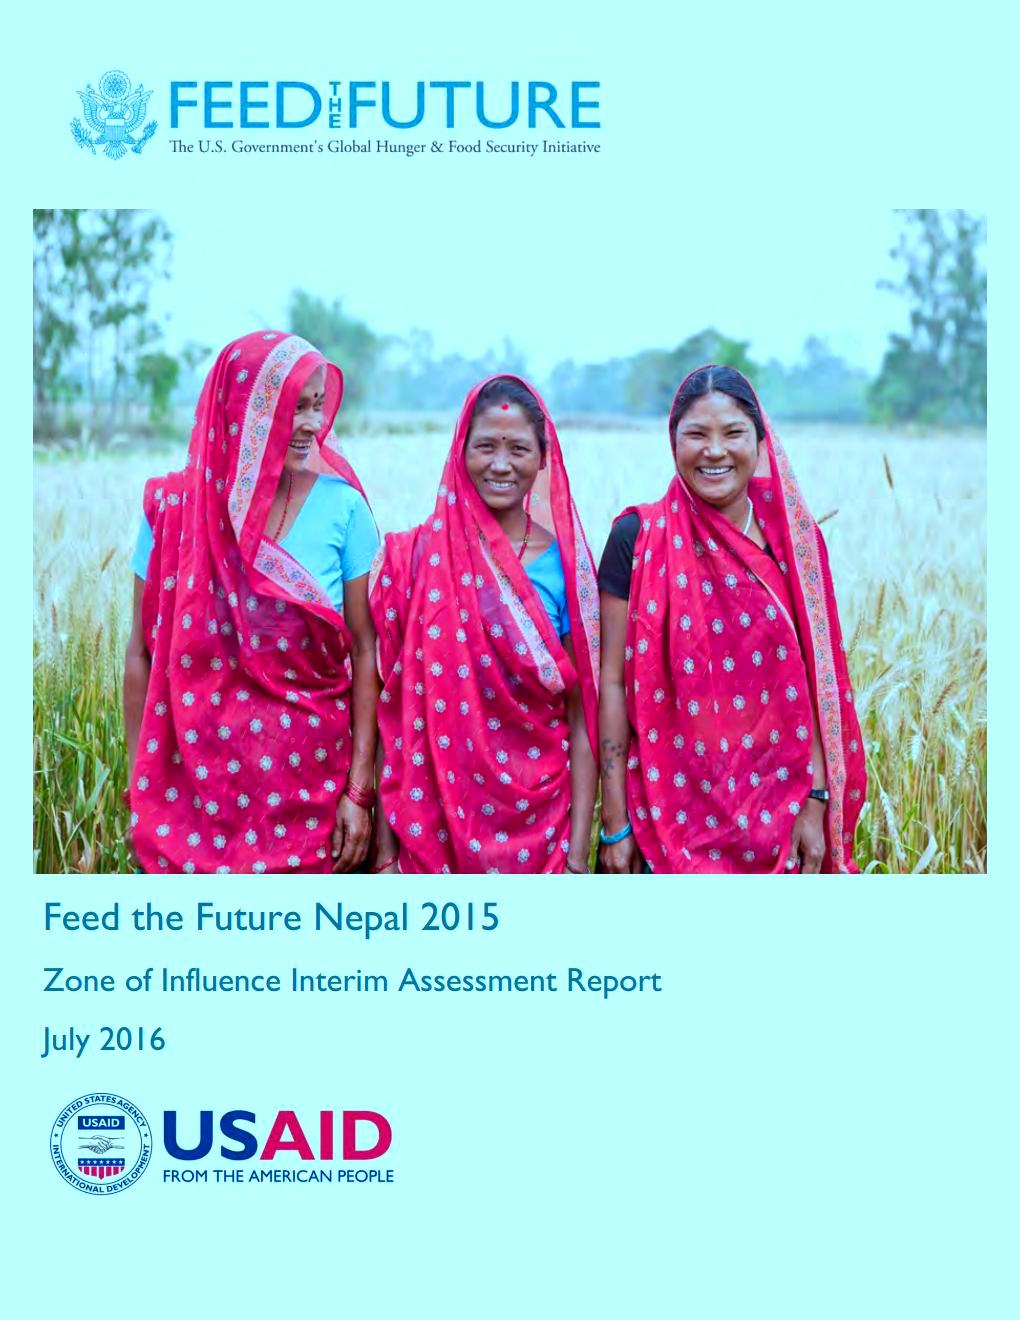 Feed the Future Nepal 2015 – Zone of Influence Interim Assessment Report